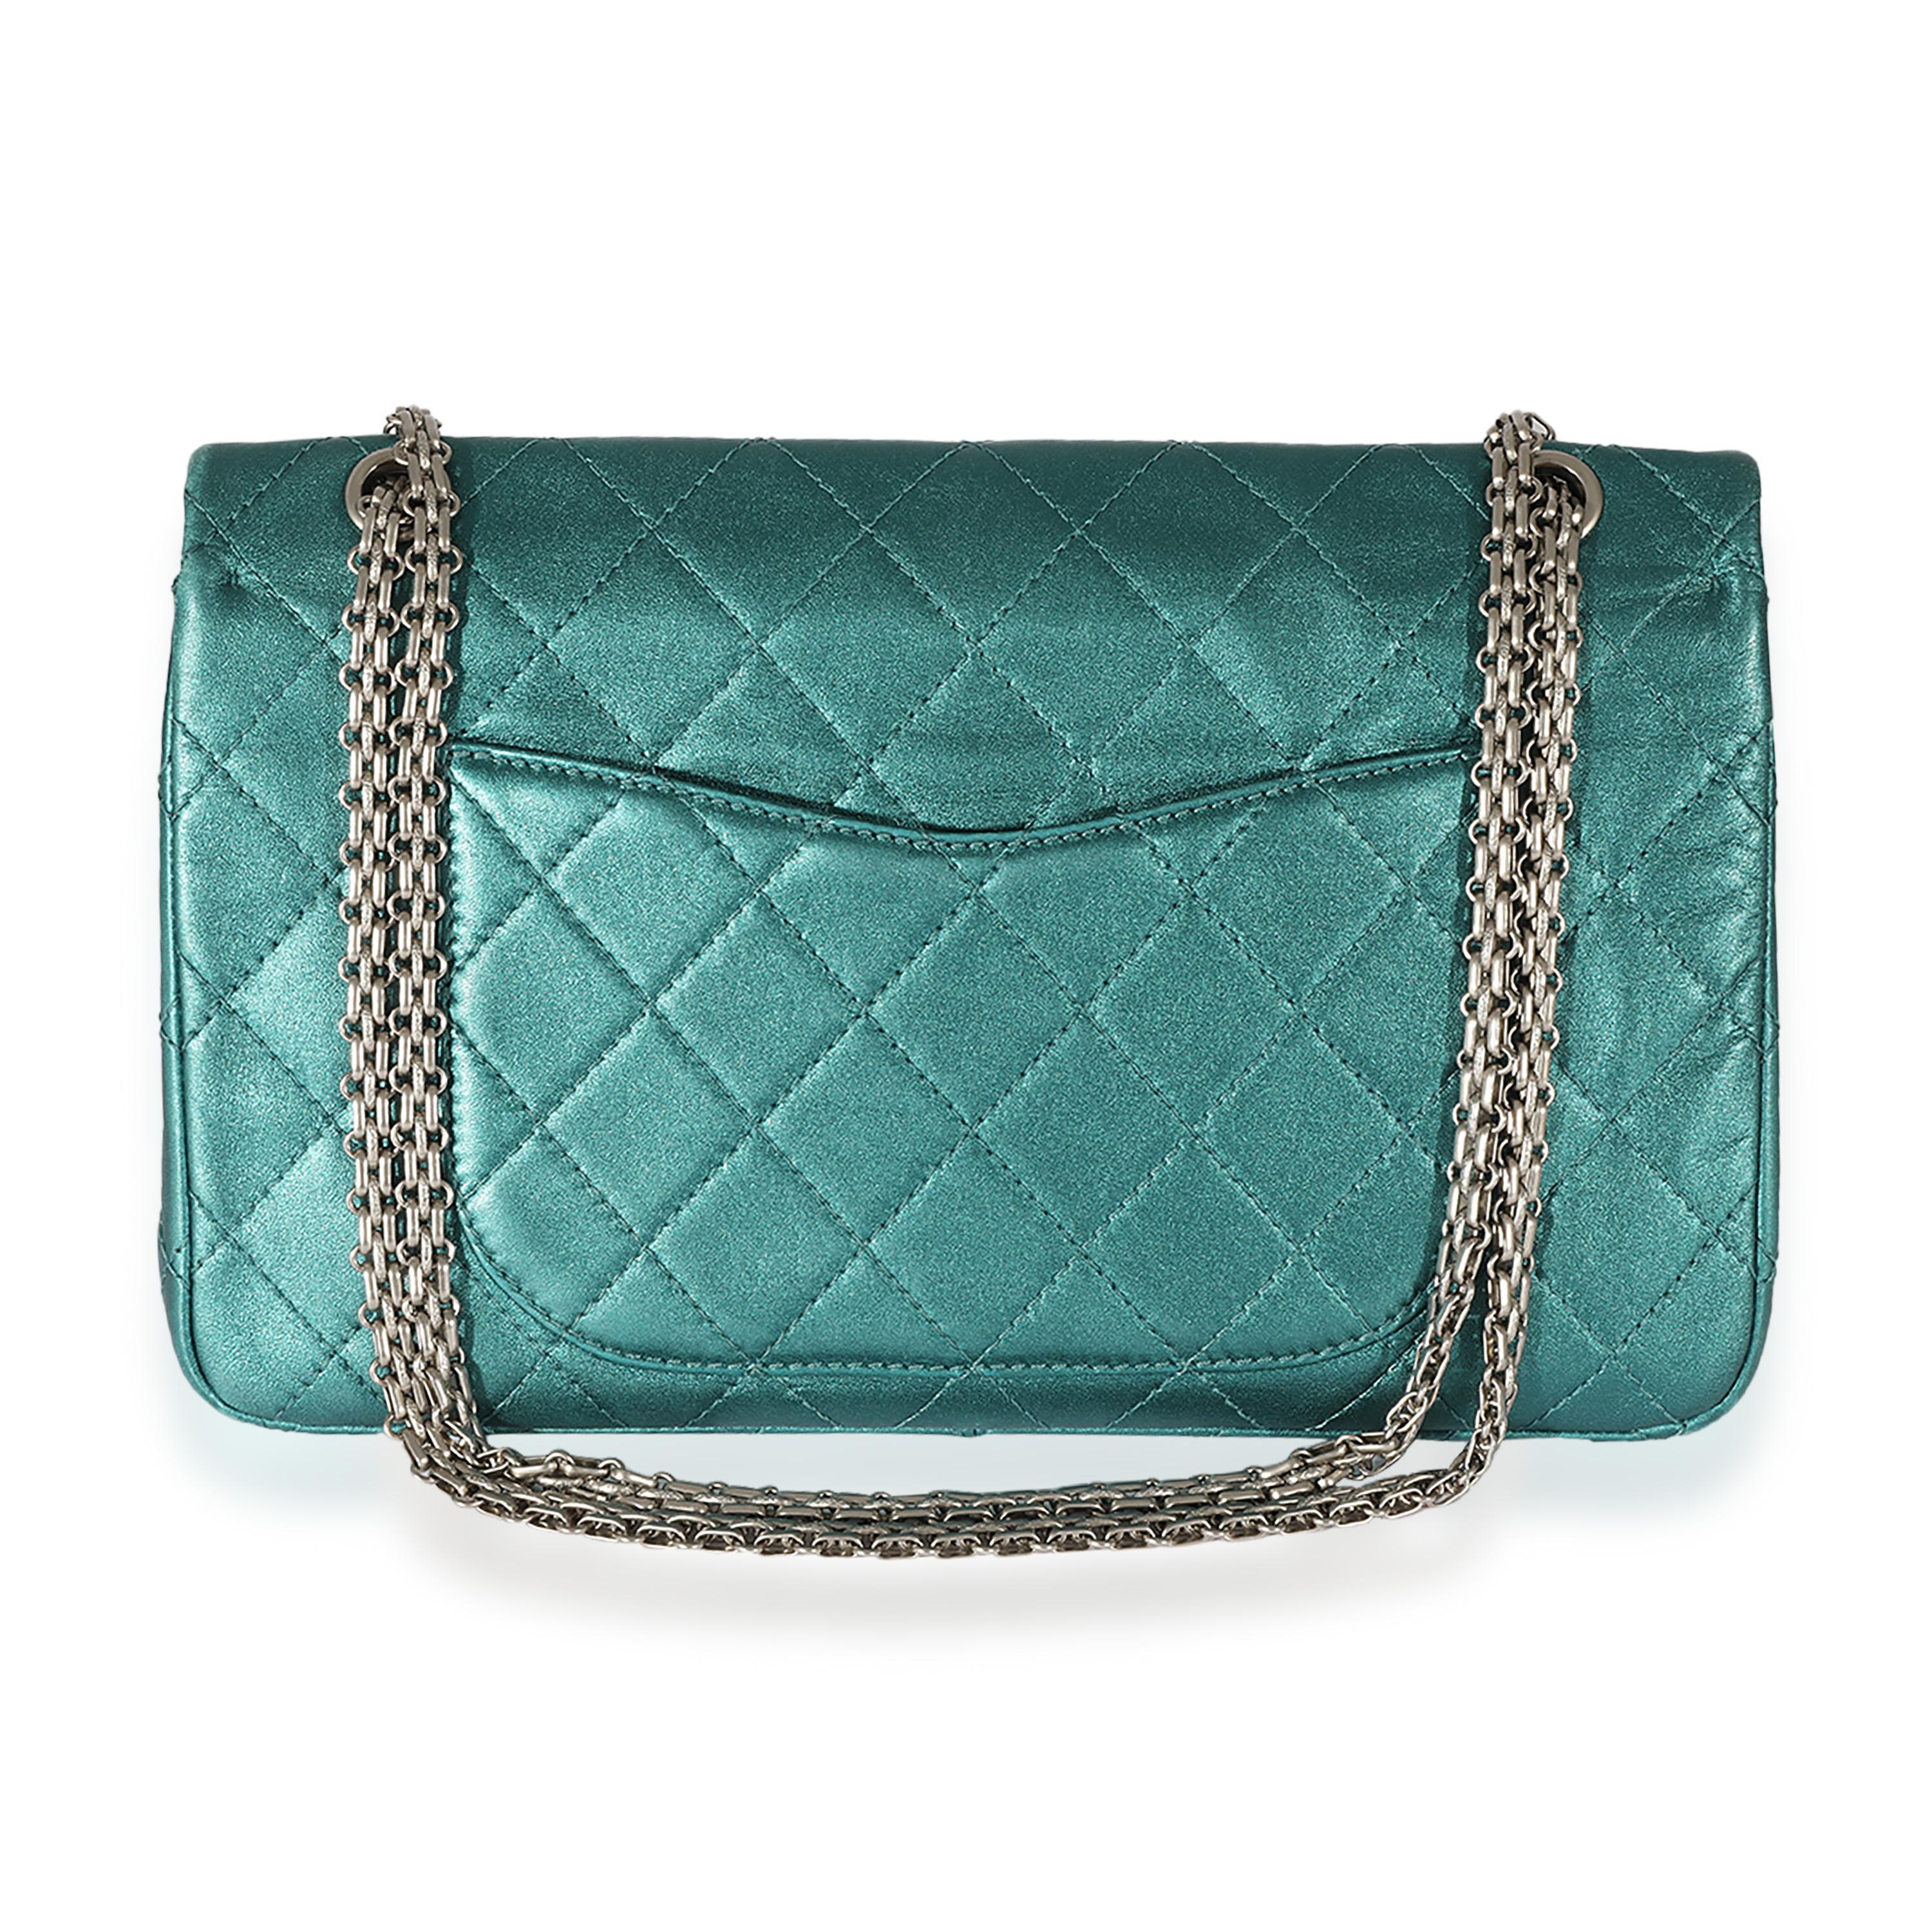 Chanel Green Metallic Leather 2.55 227 Reissue Flap Bag In Excellent Condition In New York, NY